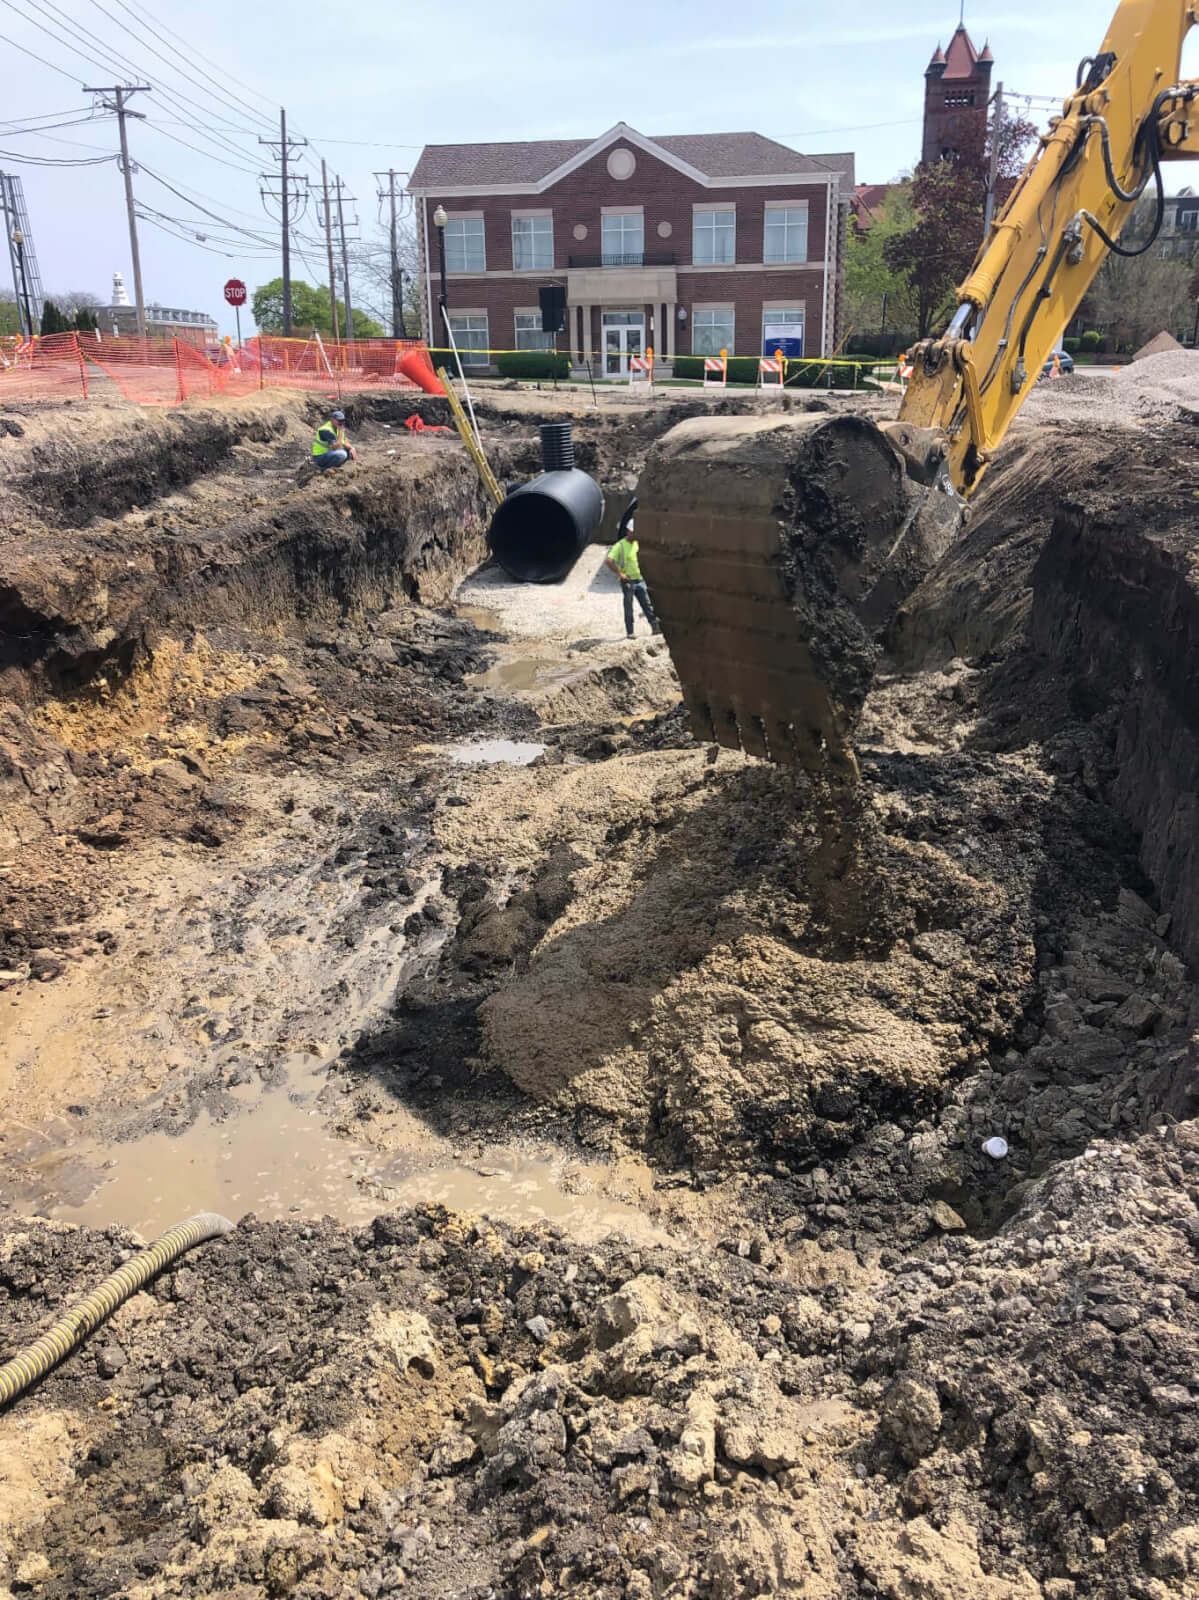 Concrete Construction with Sewer and Water Infrastructure in Downtown Area with ALAMP Crew Members and Excavator in Background